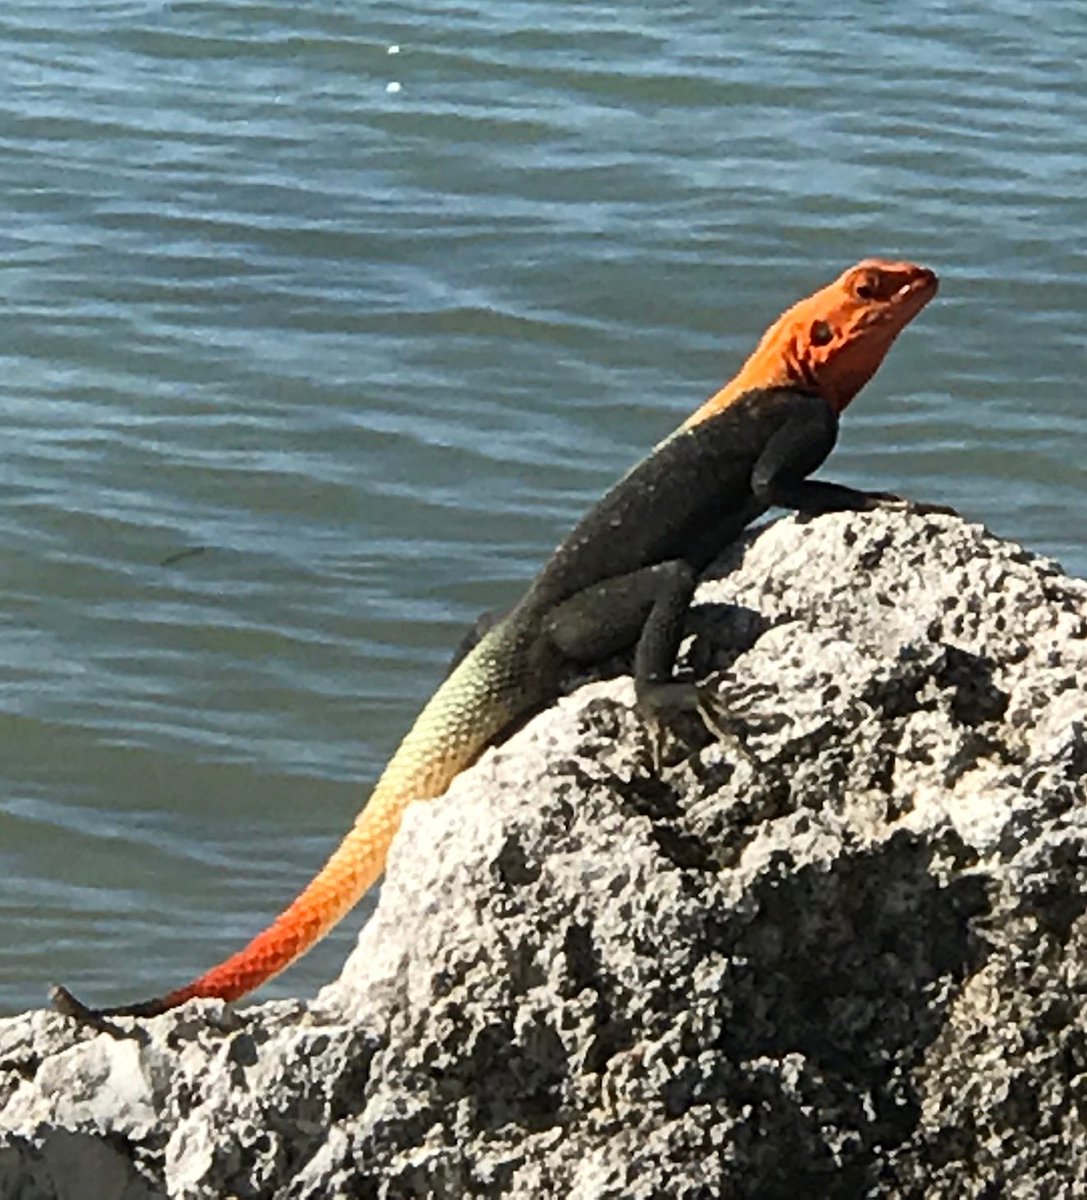 I’m in Palm Bay covering the recent brushfires here and saw this lizard for the first time in my life. It’s a Peter’s rock agama lizard and apparently it’s invasive and comes from Africa. It’s been popping up all over South Florida.